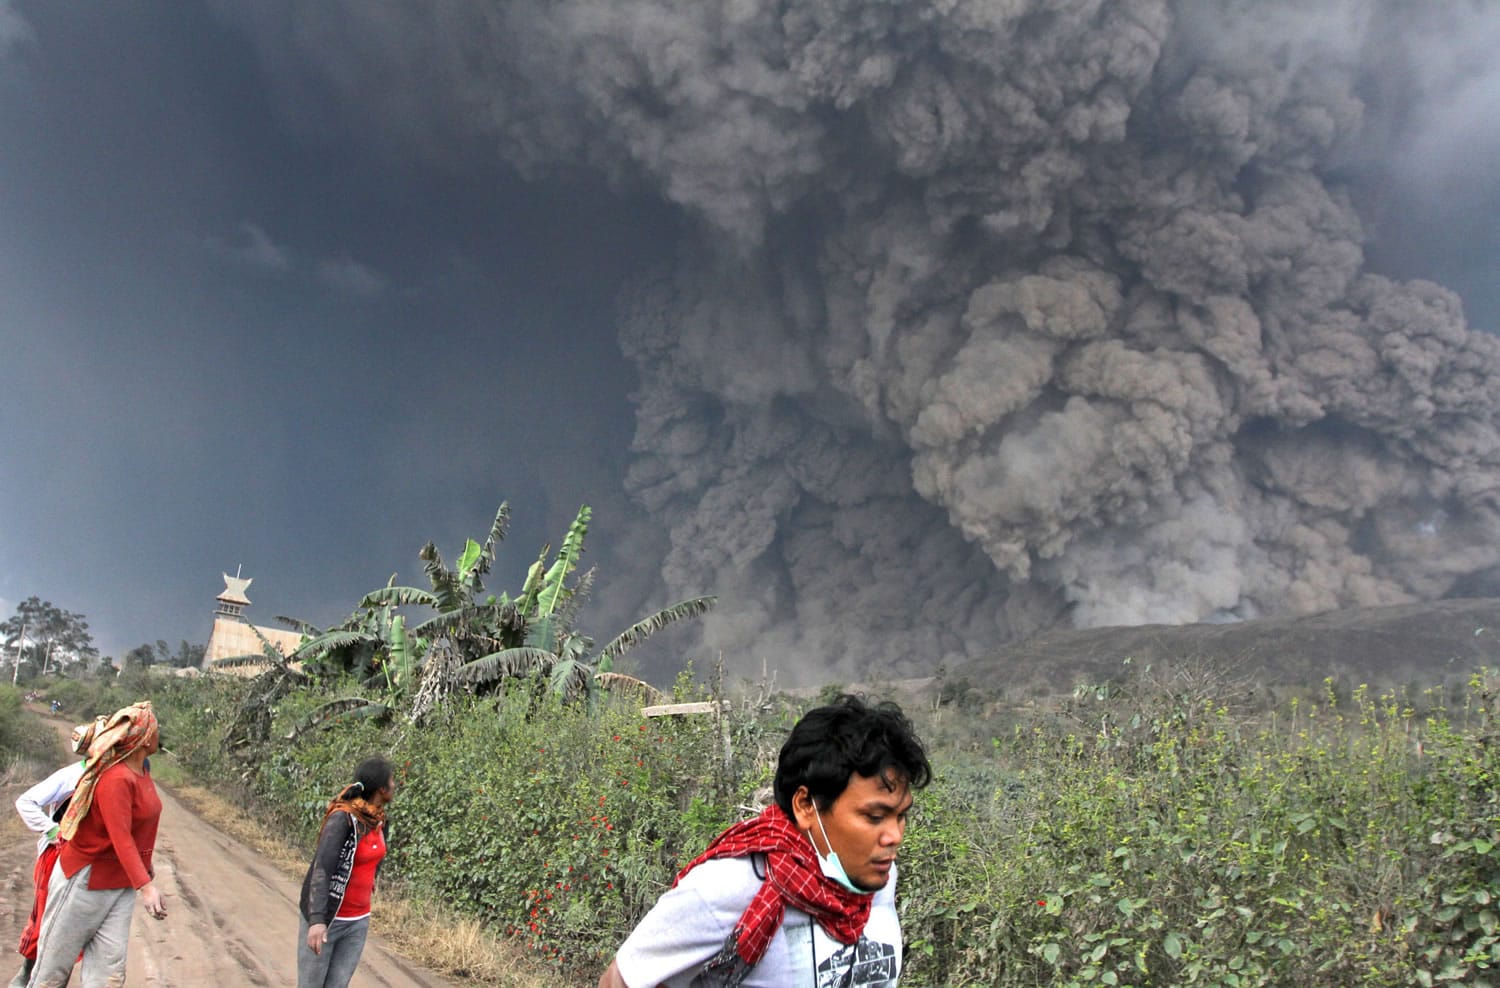 Associated Press
Villagers and a journalist prepare to flee as Mount Sinabung releases pyroclastic flows Saturday during an eruption that began four months ago in Namantaran, North Sumatra, western Indonesia. The rumbling volcano has unleashed fresh clouds of searing gas, killing at least 14 people and injuring more; the tolls are expected to rise.